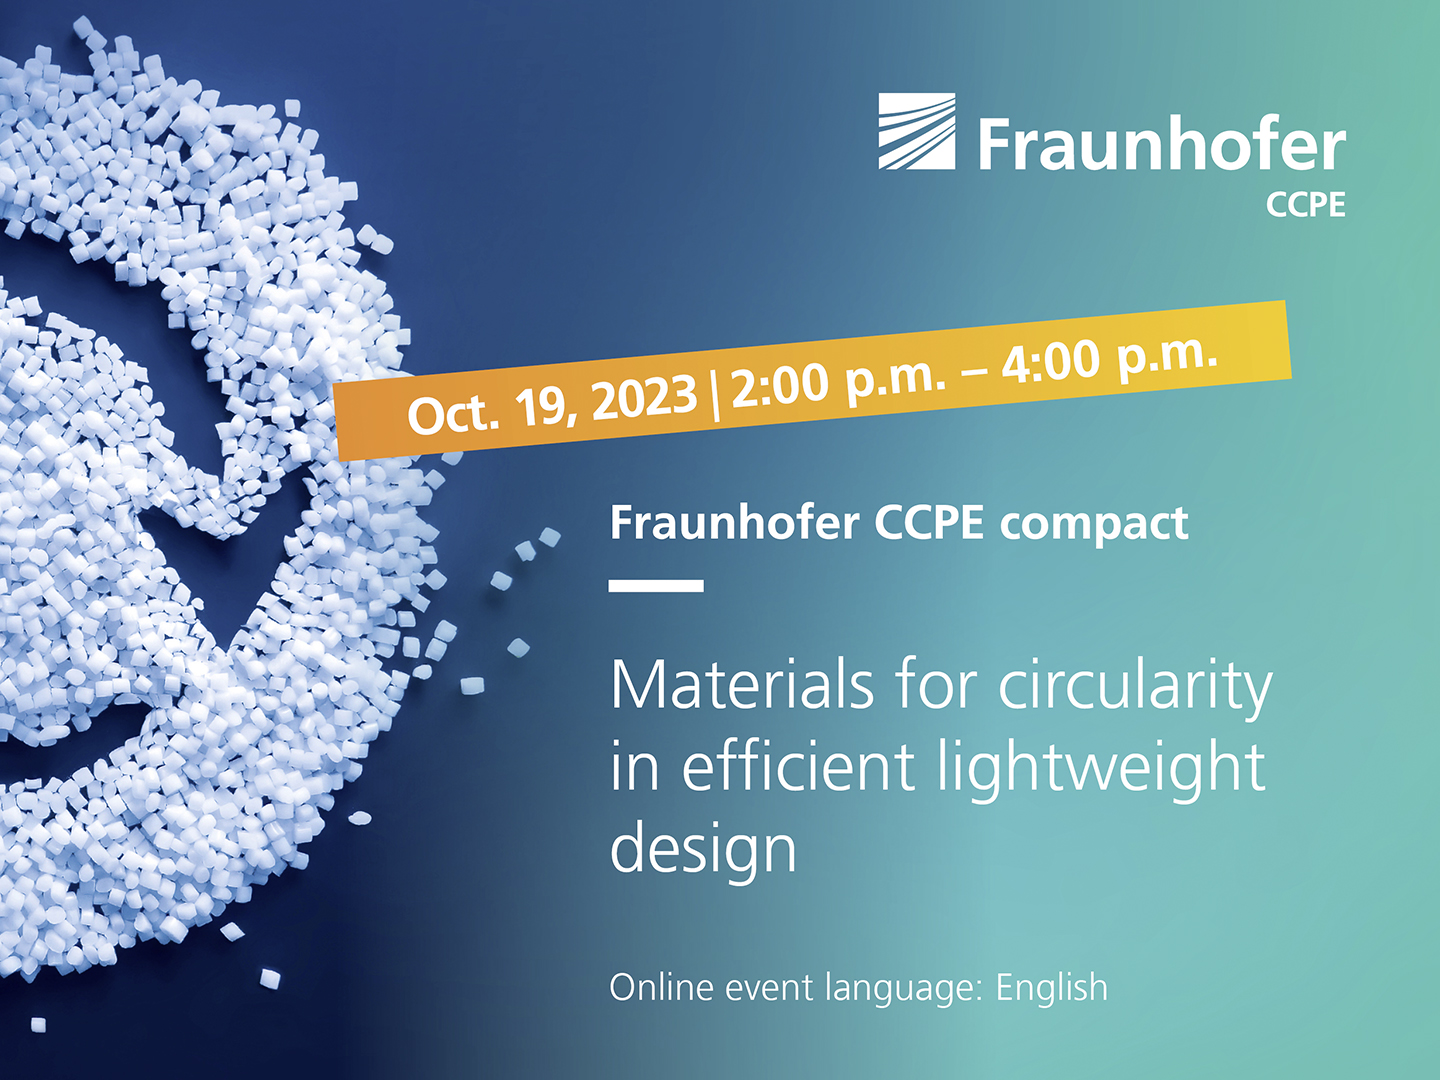 Fraunhofer CCPE compact: Materials for circularity in efficient lightweight design